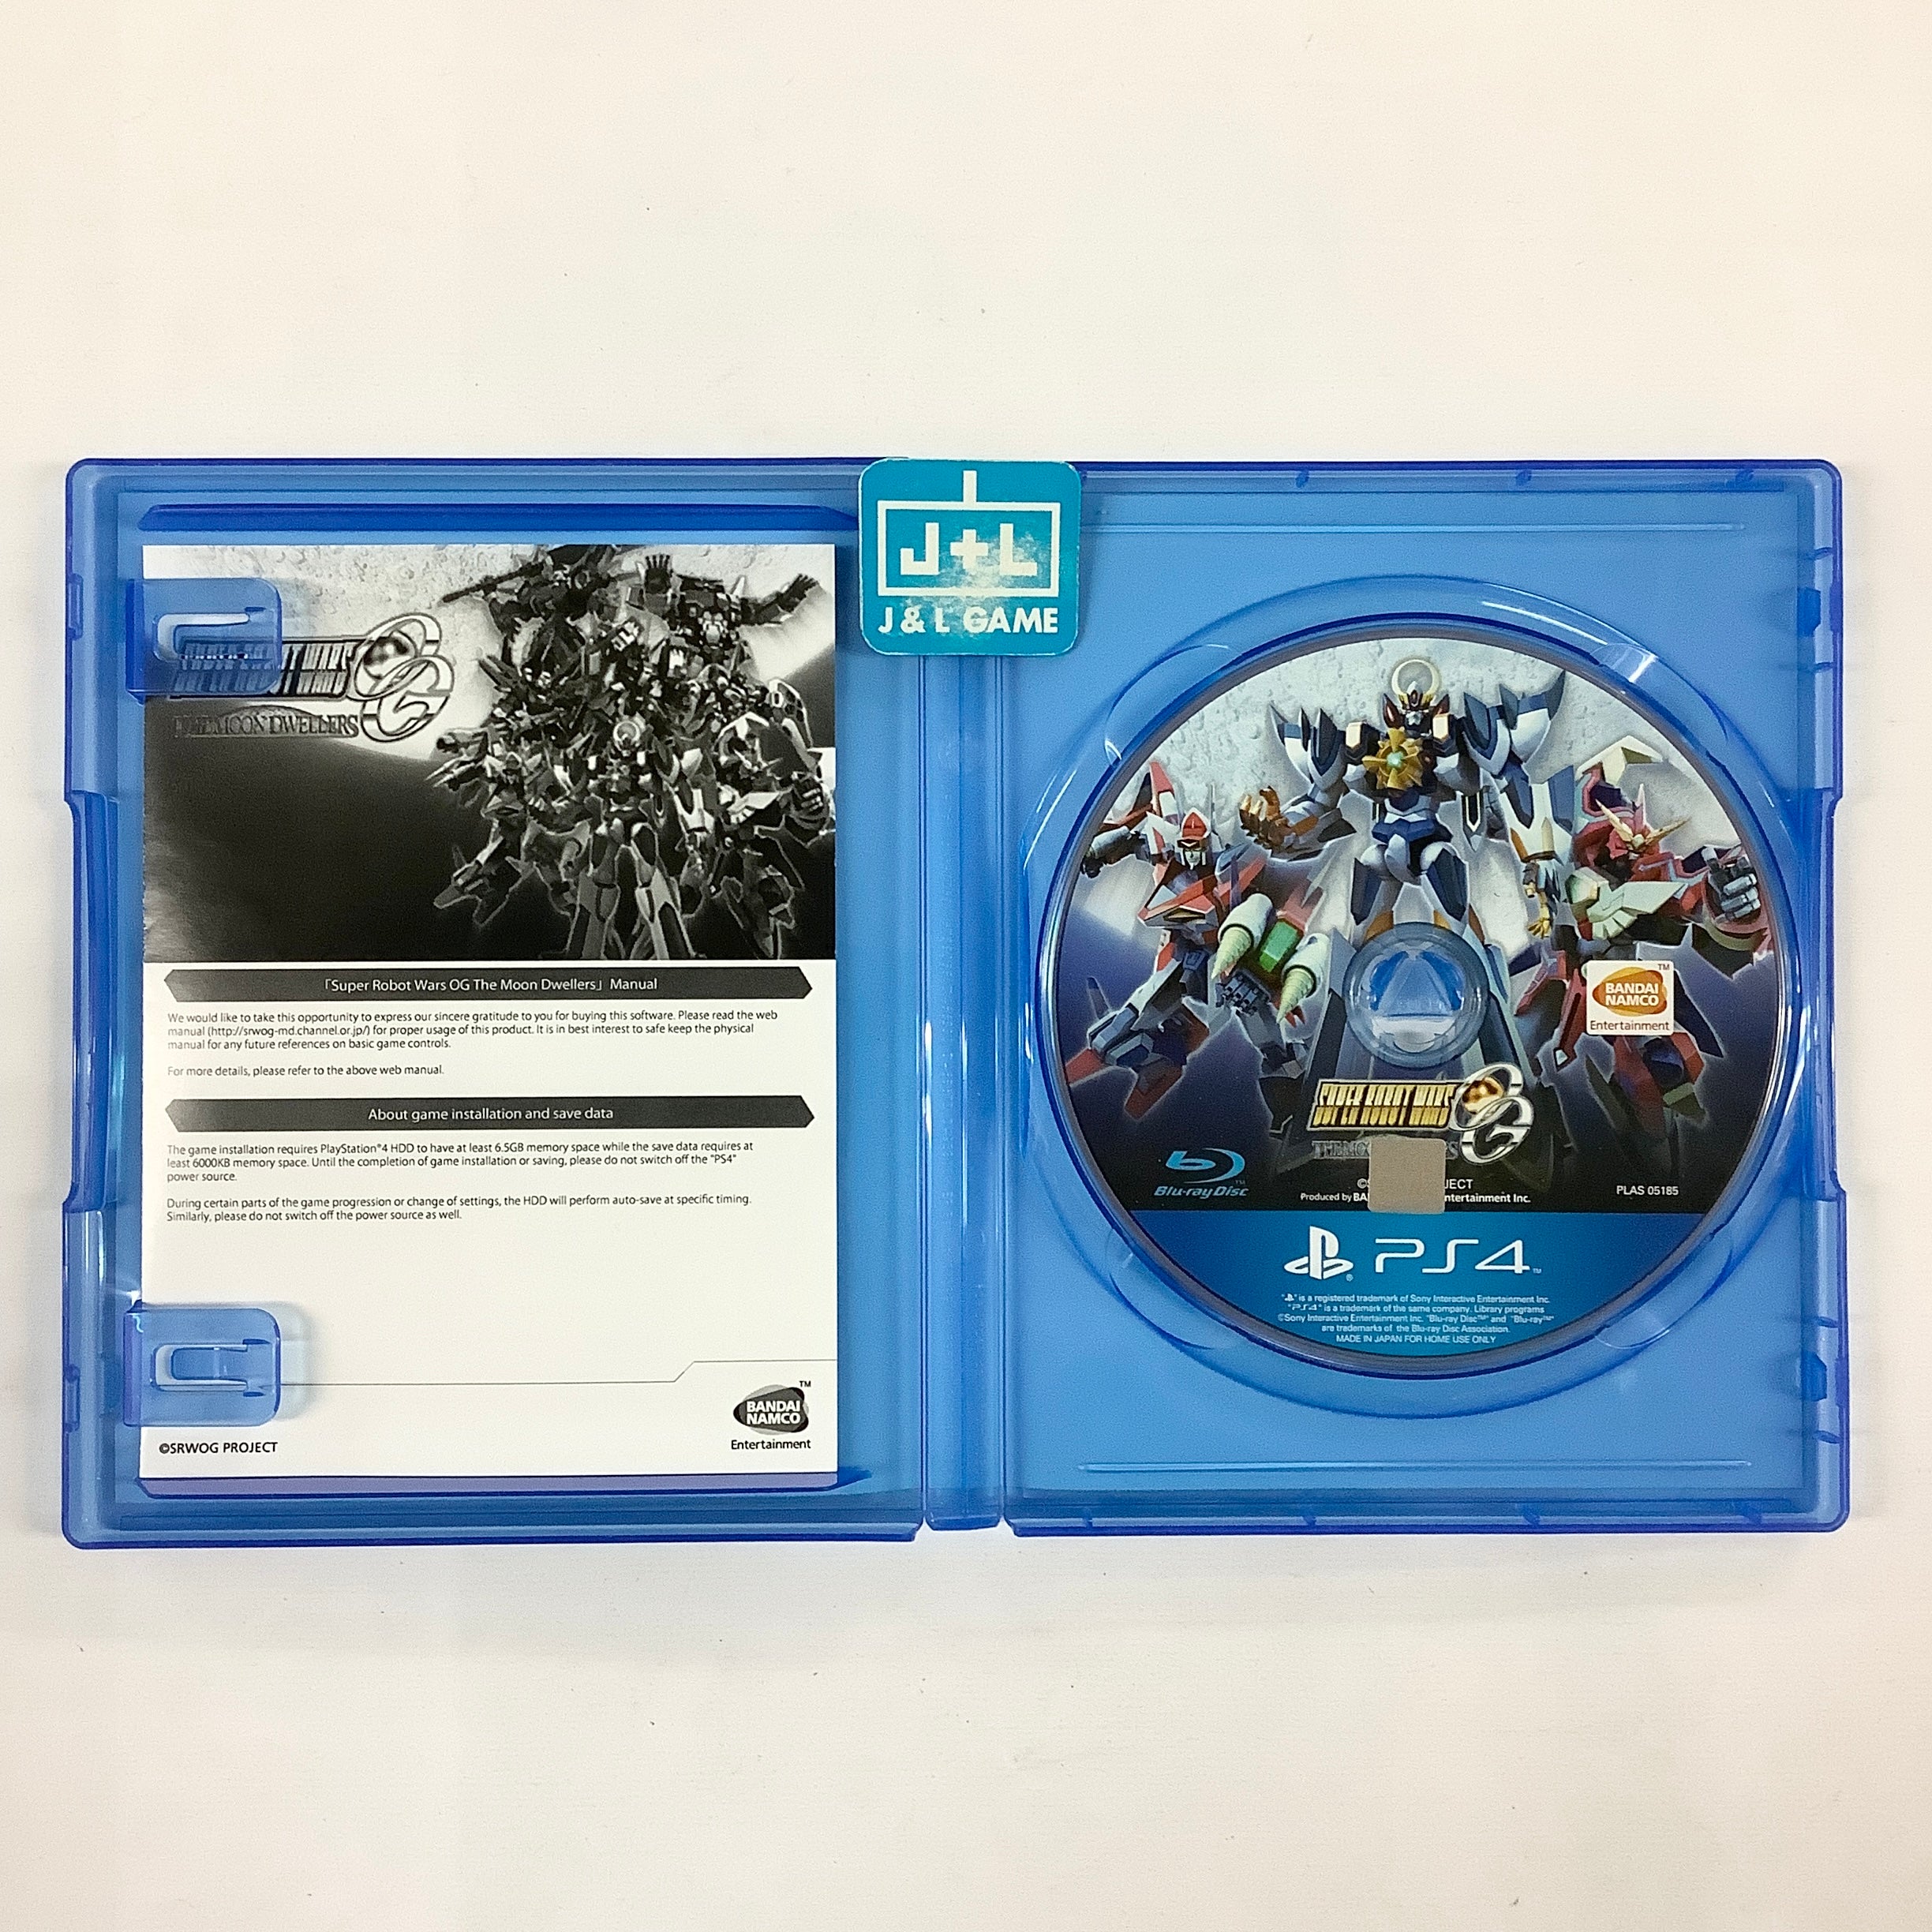 Super Robot Wars OG: The Moon Dwellers (English Subtitles) - (PS4) PlayStation 4 [Pre-Owned] (Asia Import) Video Games Bandai Namco   